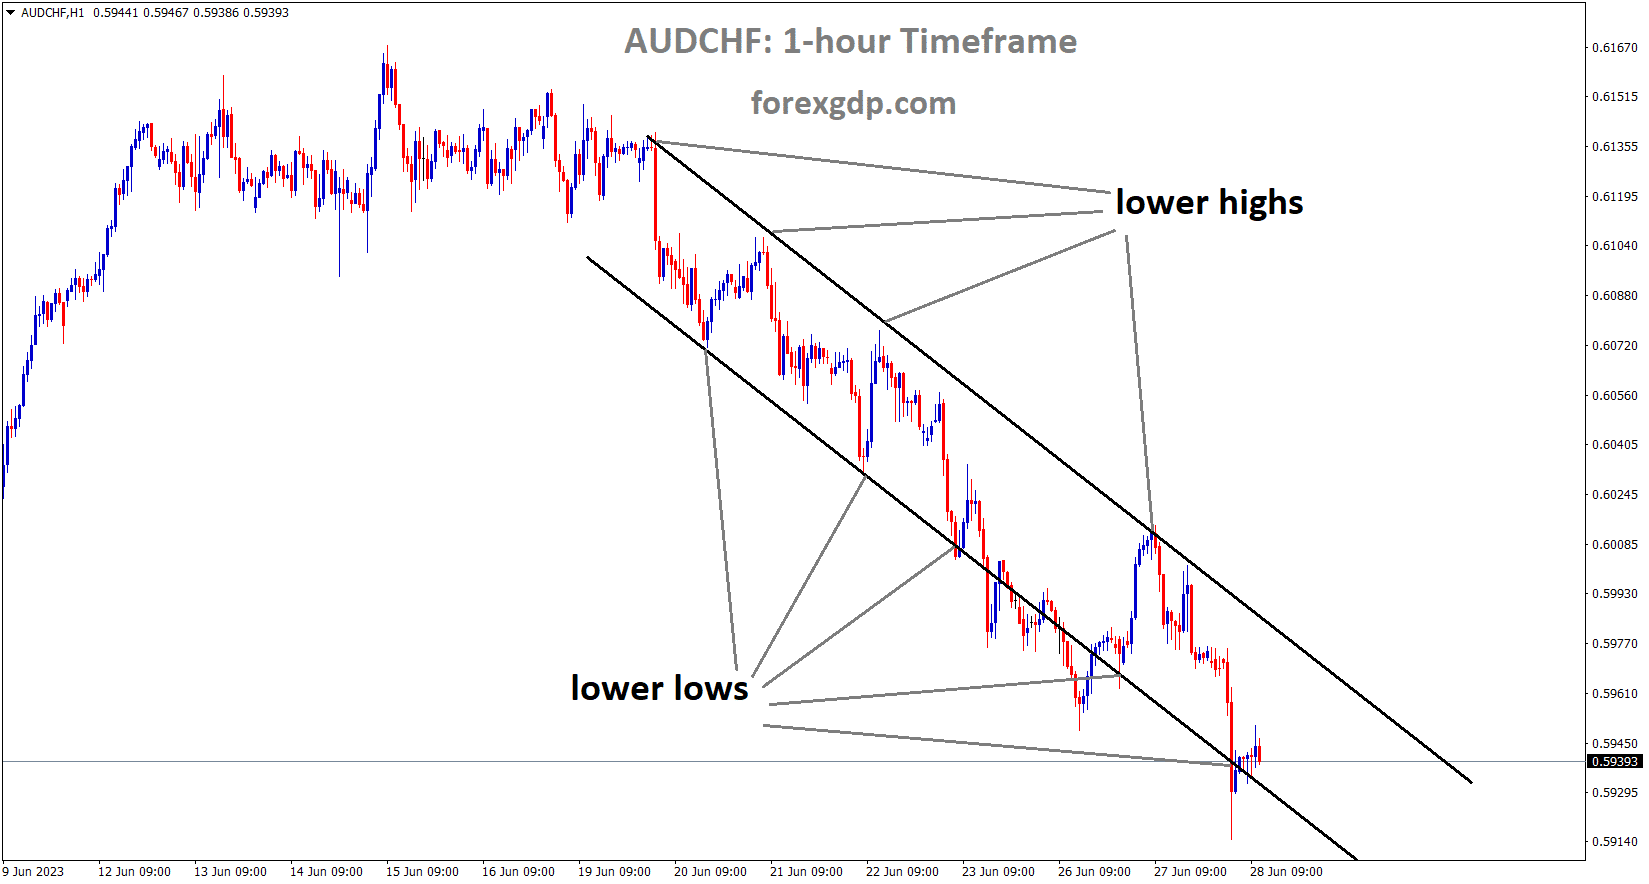 AUDCHF is moving in the Descending Channel and the market has rebounded from the lower low area of the channel